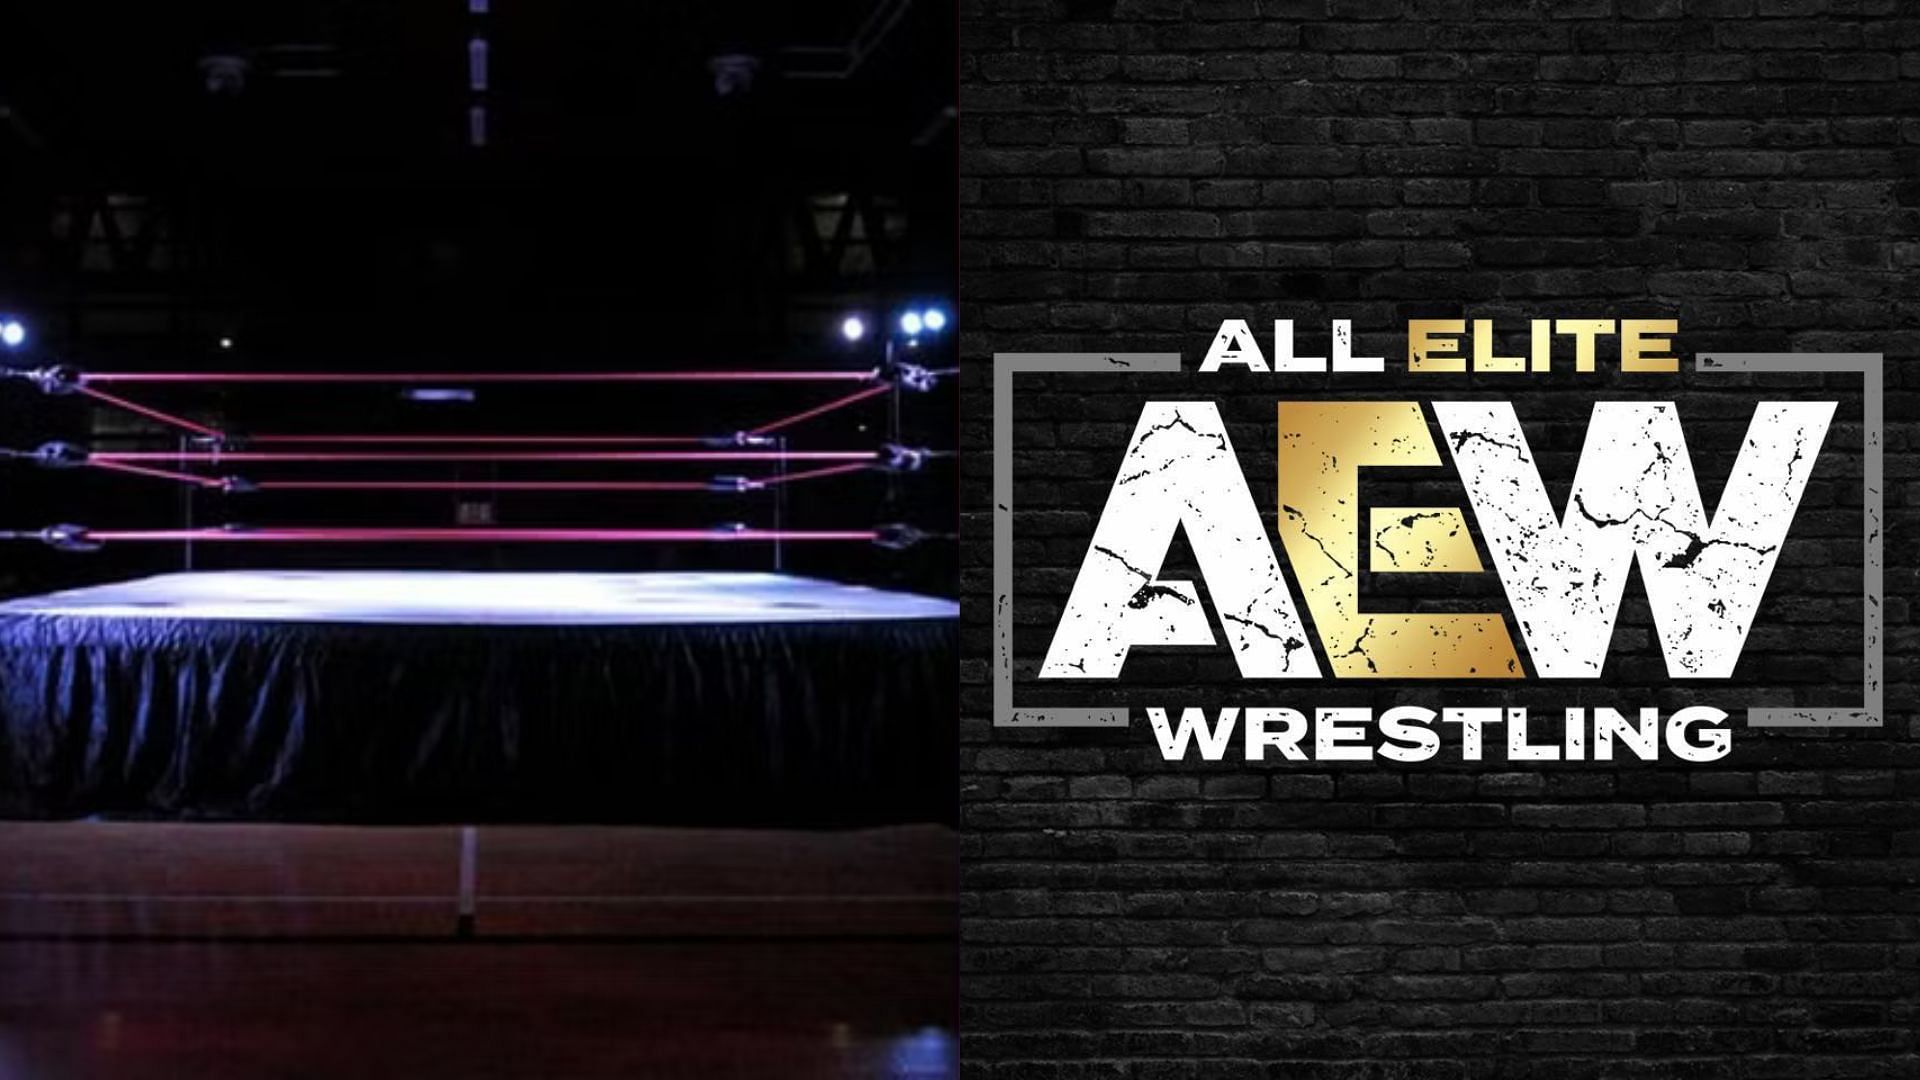 Injured AEW star getting closer to return - Reports